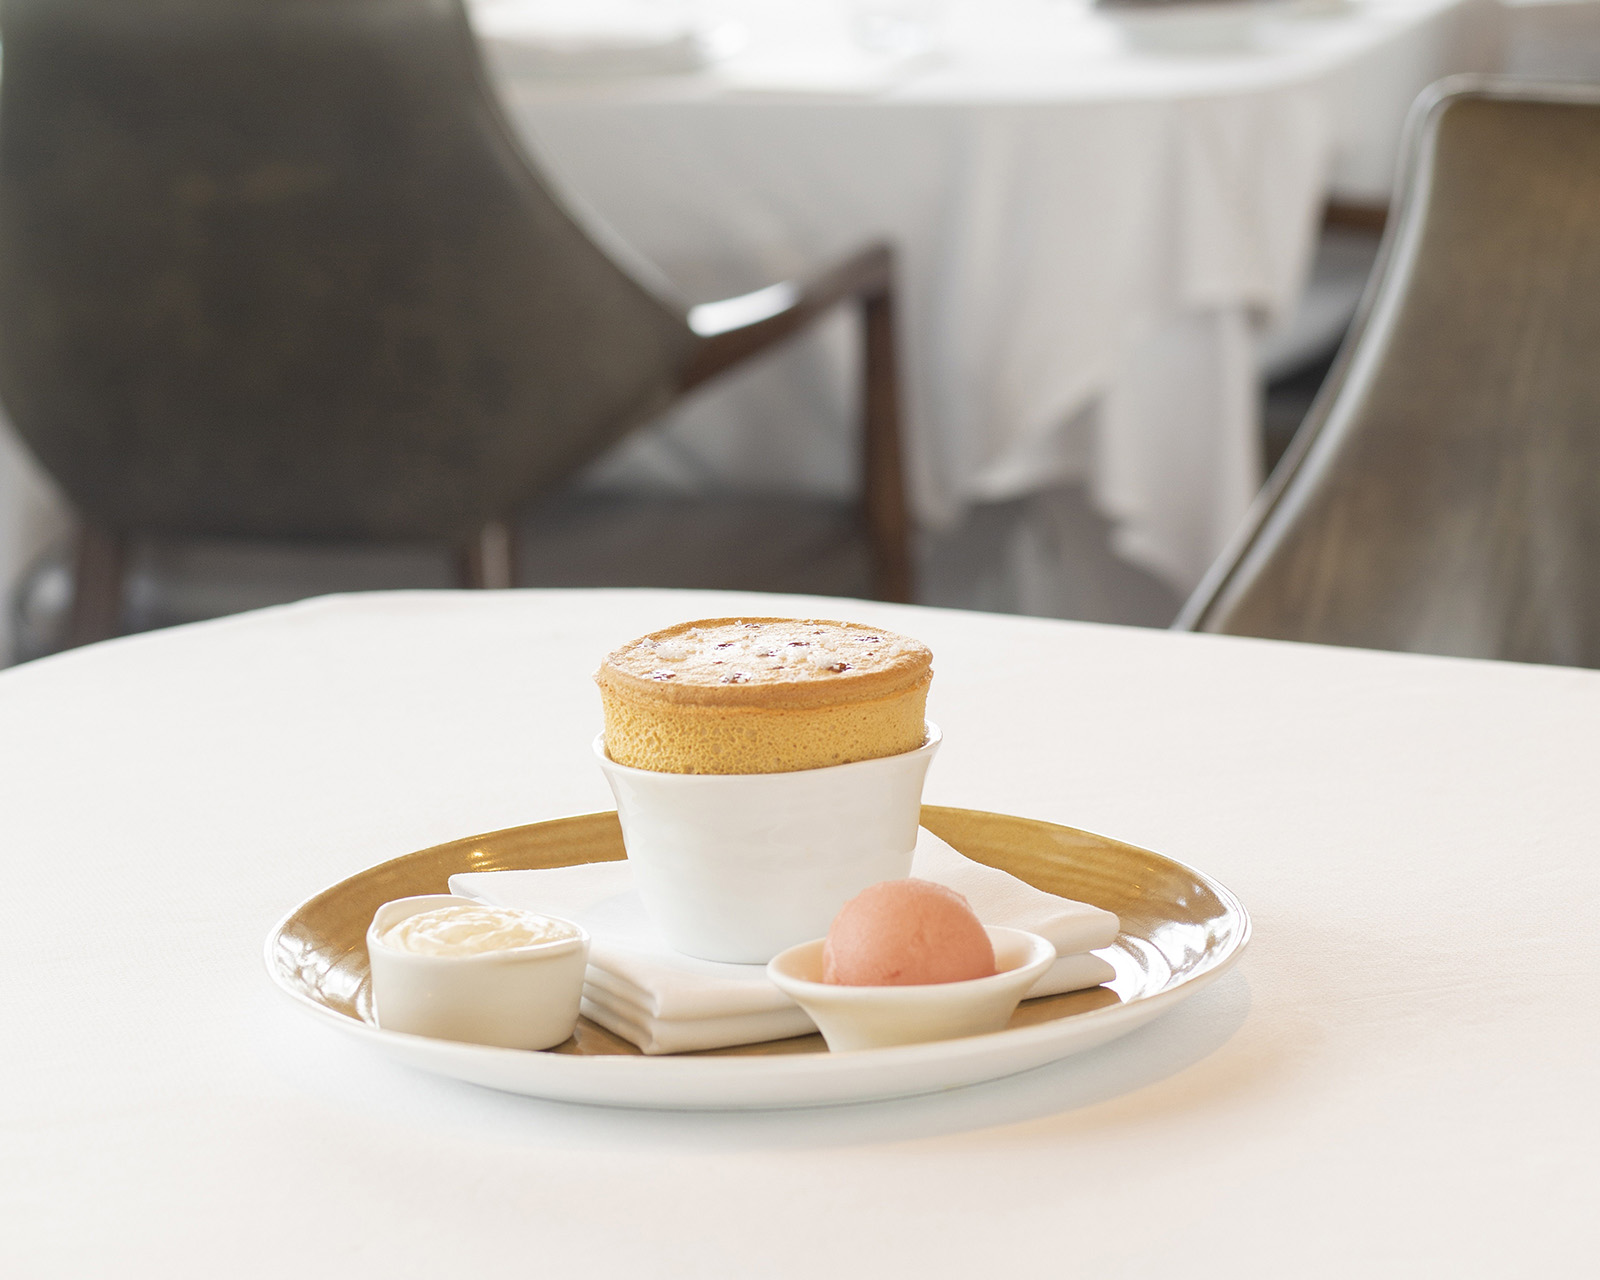 Spago Dining Room by Wolfgang Puck_Caramel Souffle